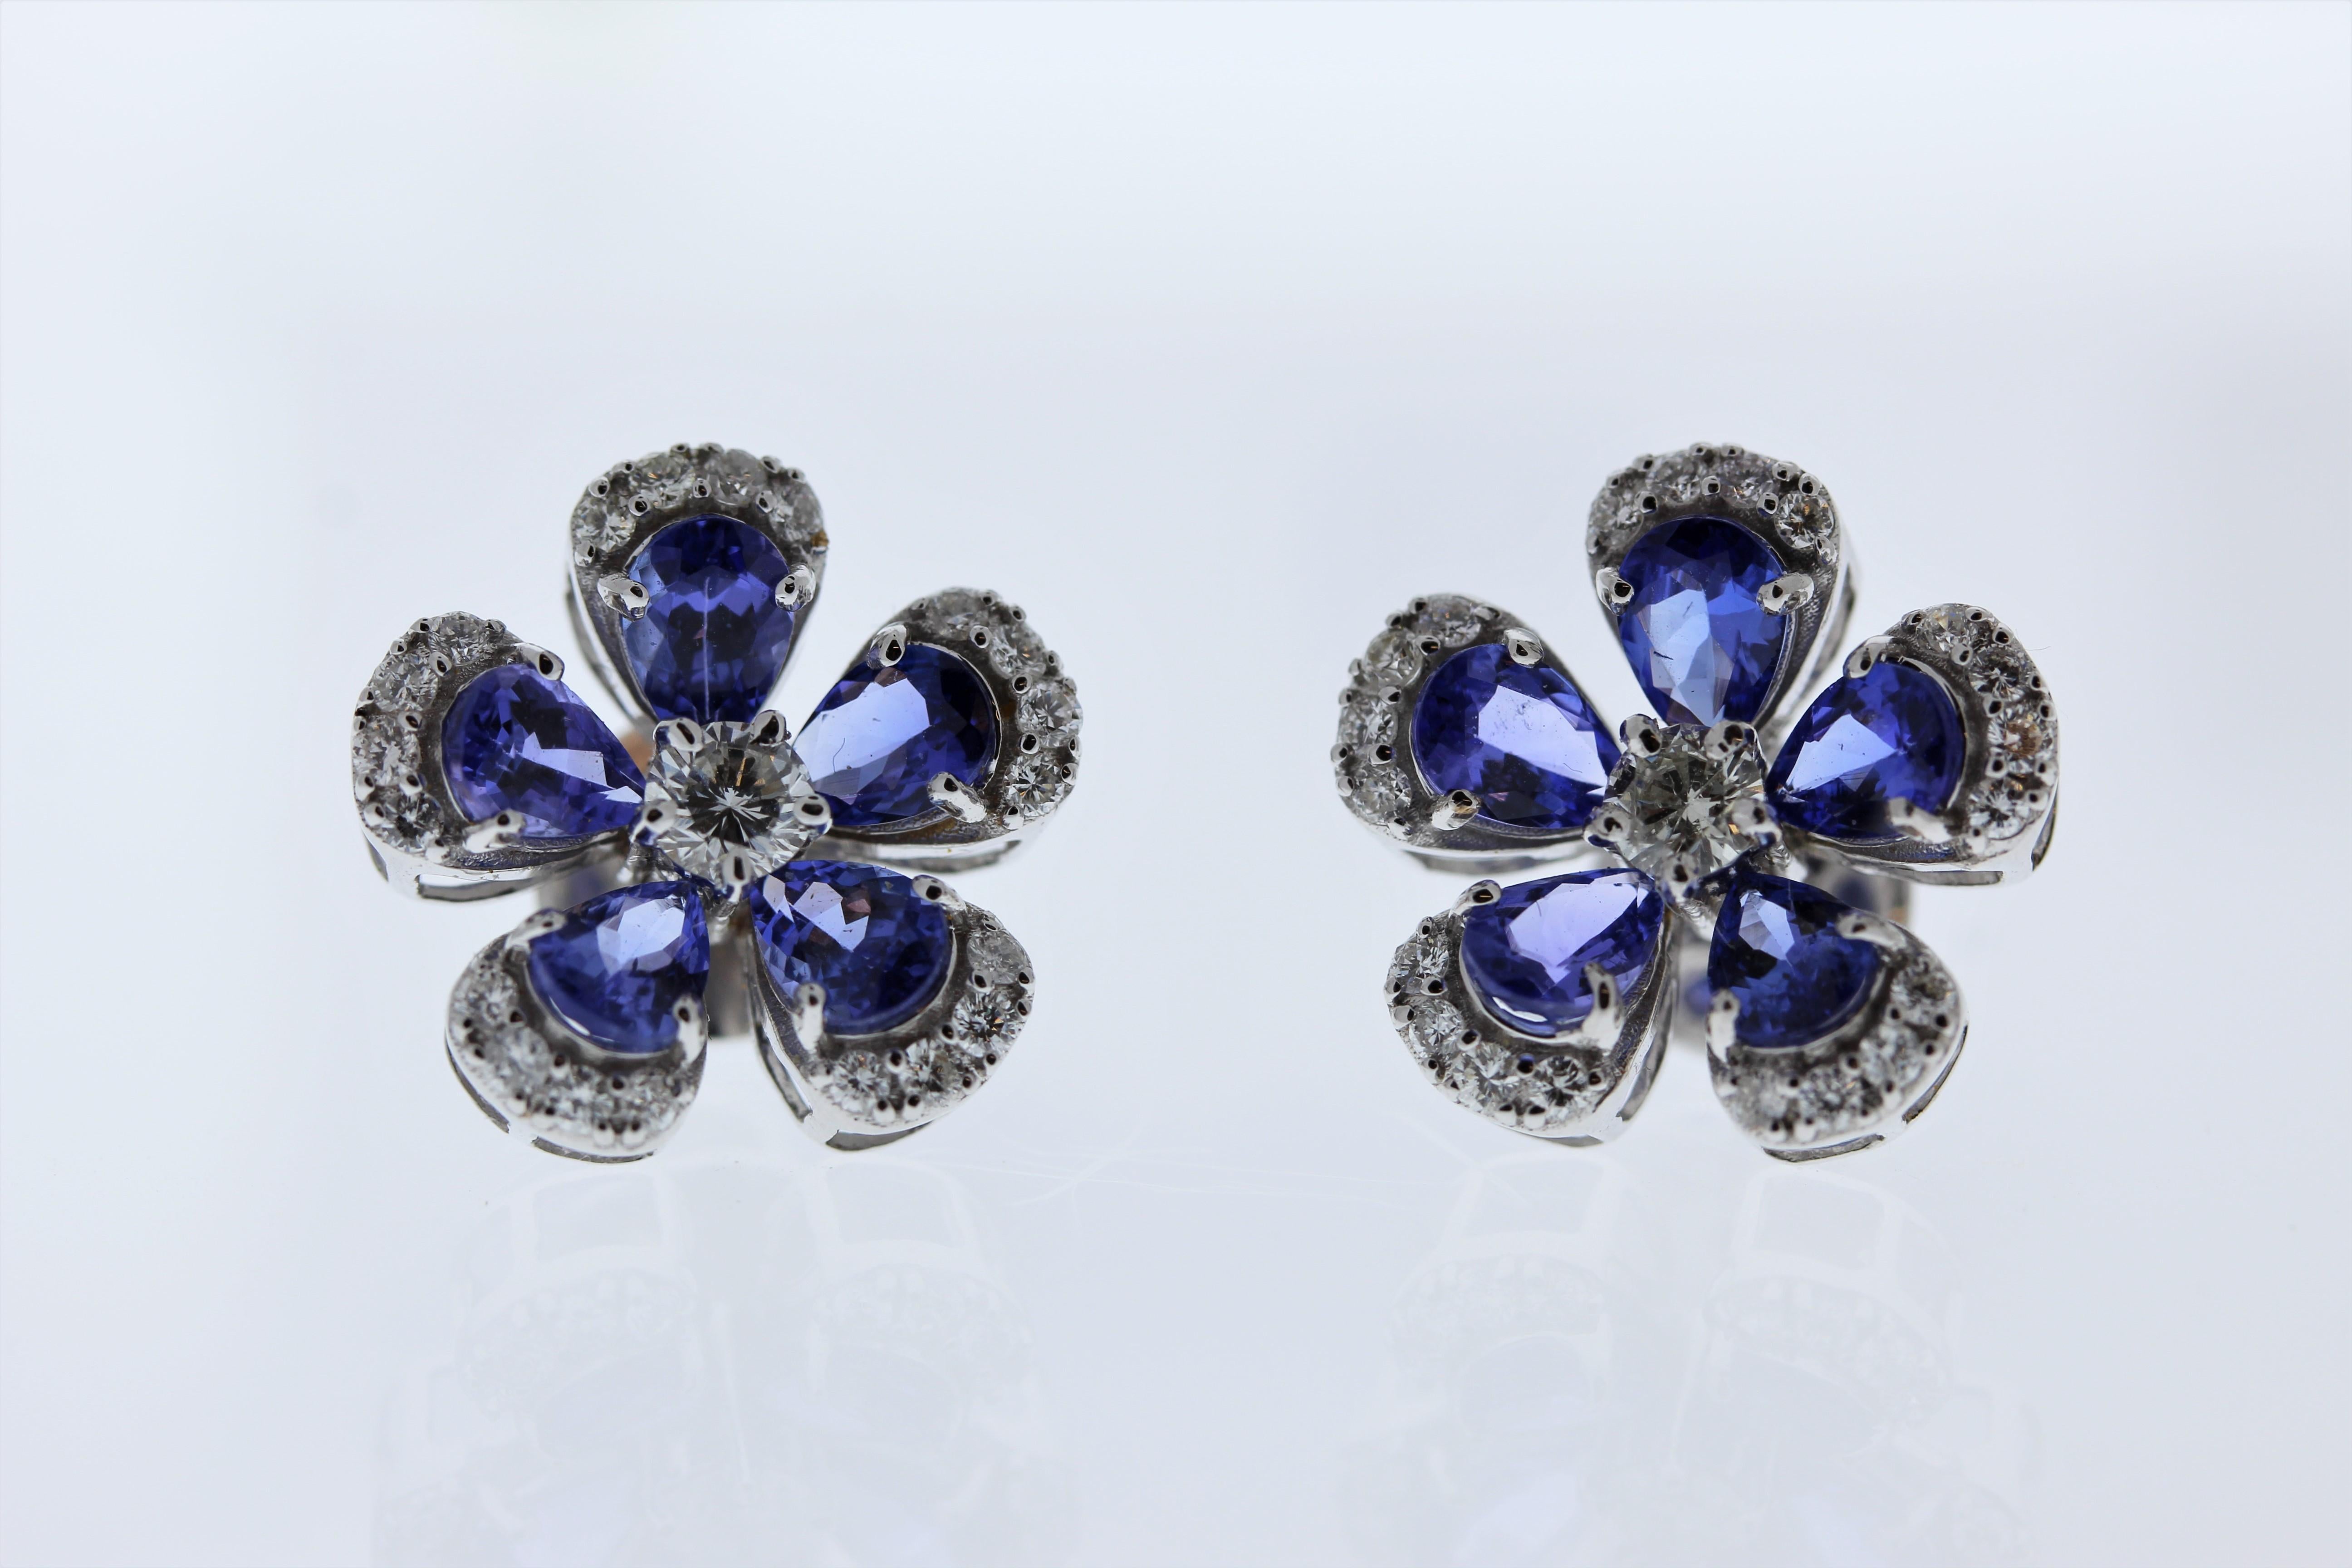 If you love floral motifs, these tanzanite earrings will have to be a must-have. The gem source is near the foothills of Mt. Kilimanjaro in Tanzania. Matching the intense blue-violet color was challenging. The saturation is what you want; its